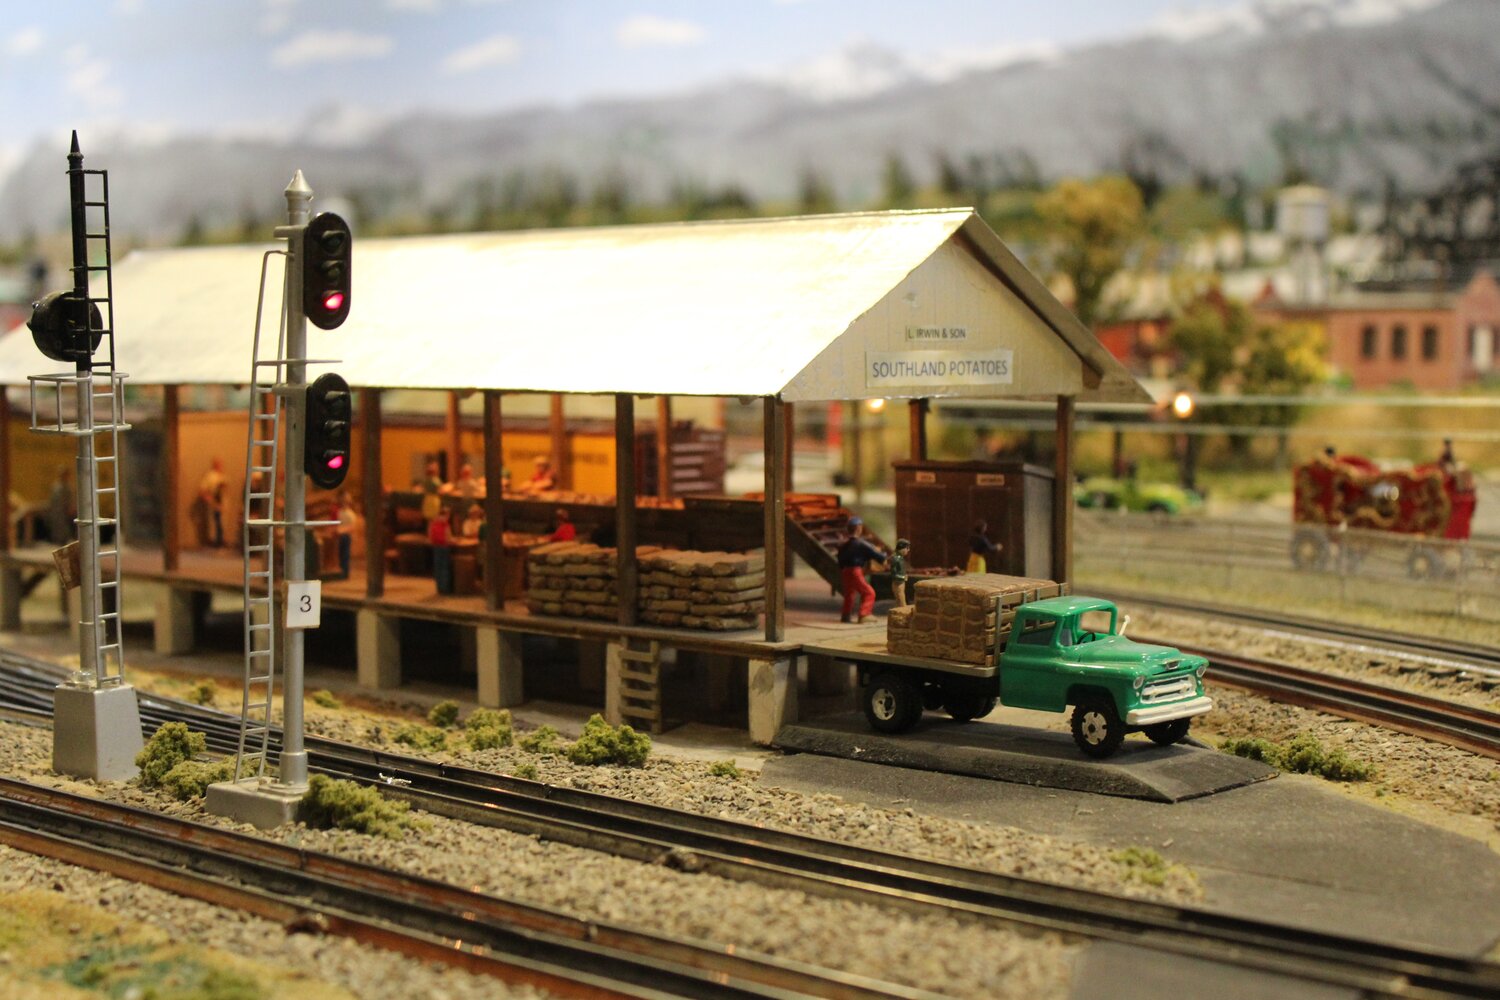 A replica of the L. Irwin & Sons Southland Potatoes’ rail side potato shed is one of a handful of historic Foley replicas added over the years. Caboose Club member Bob Irwin helped create the model of his father and grandfather’s business.